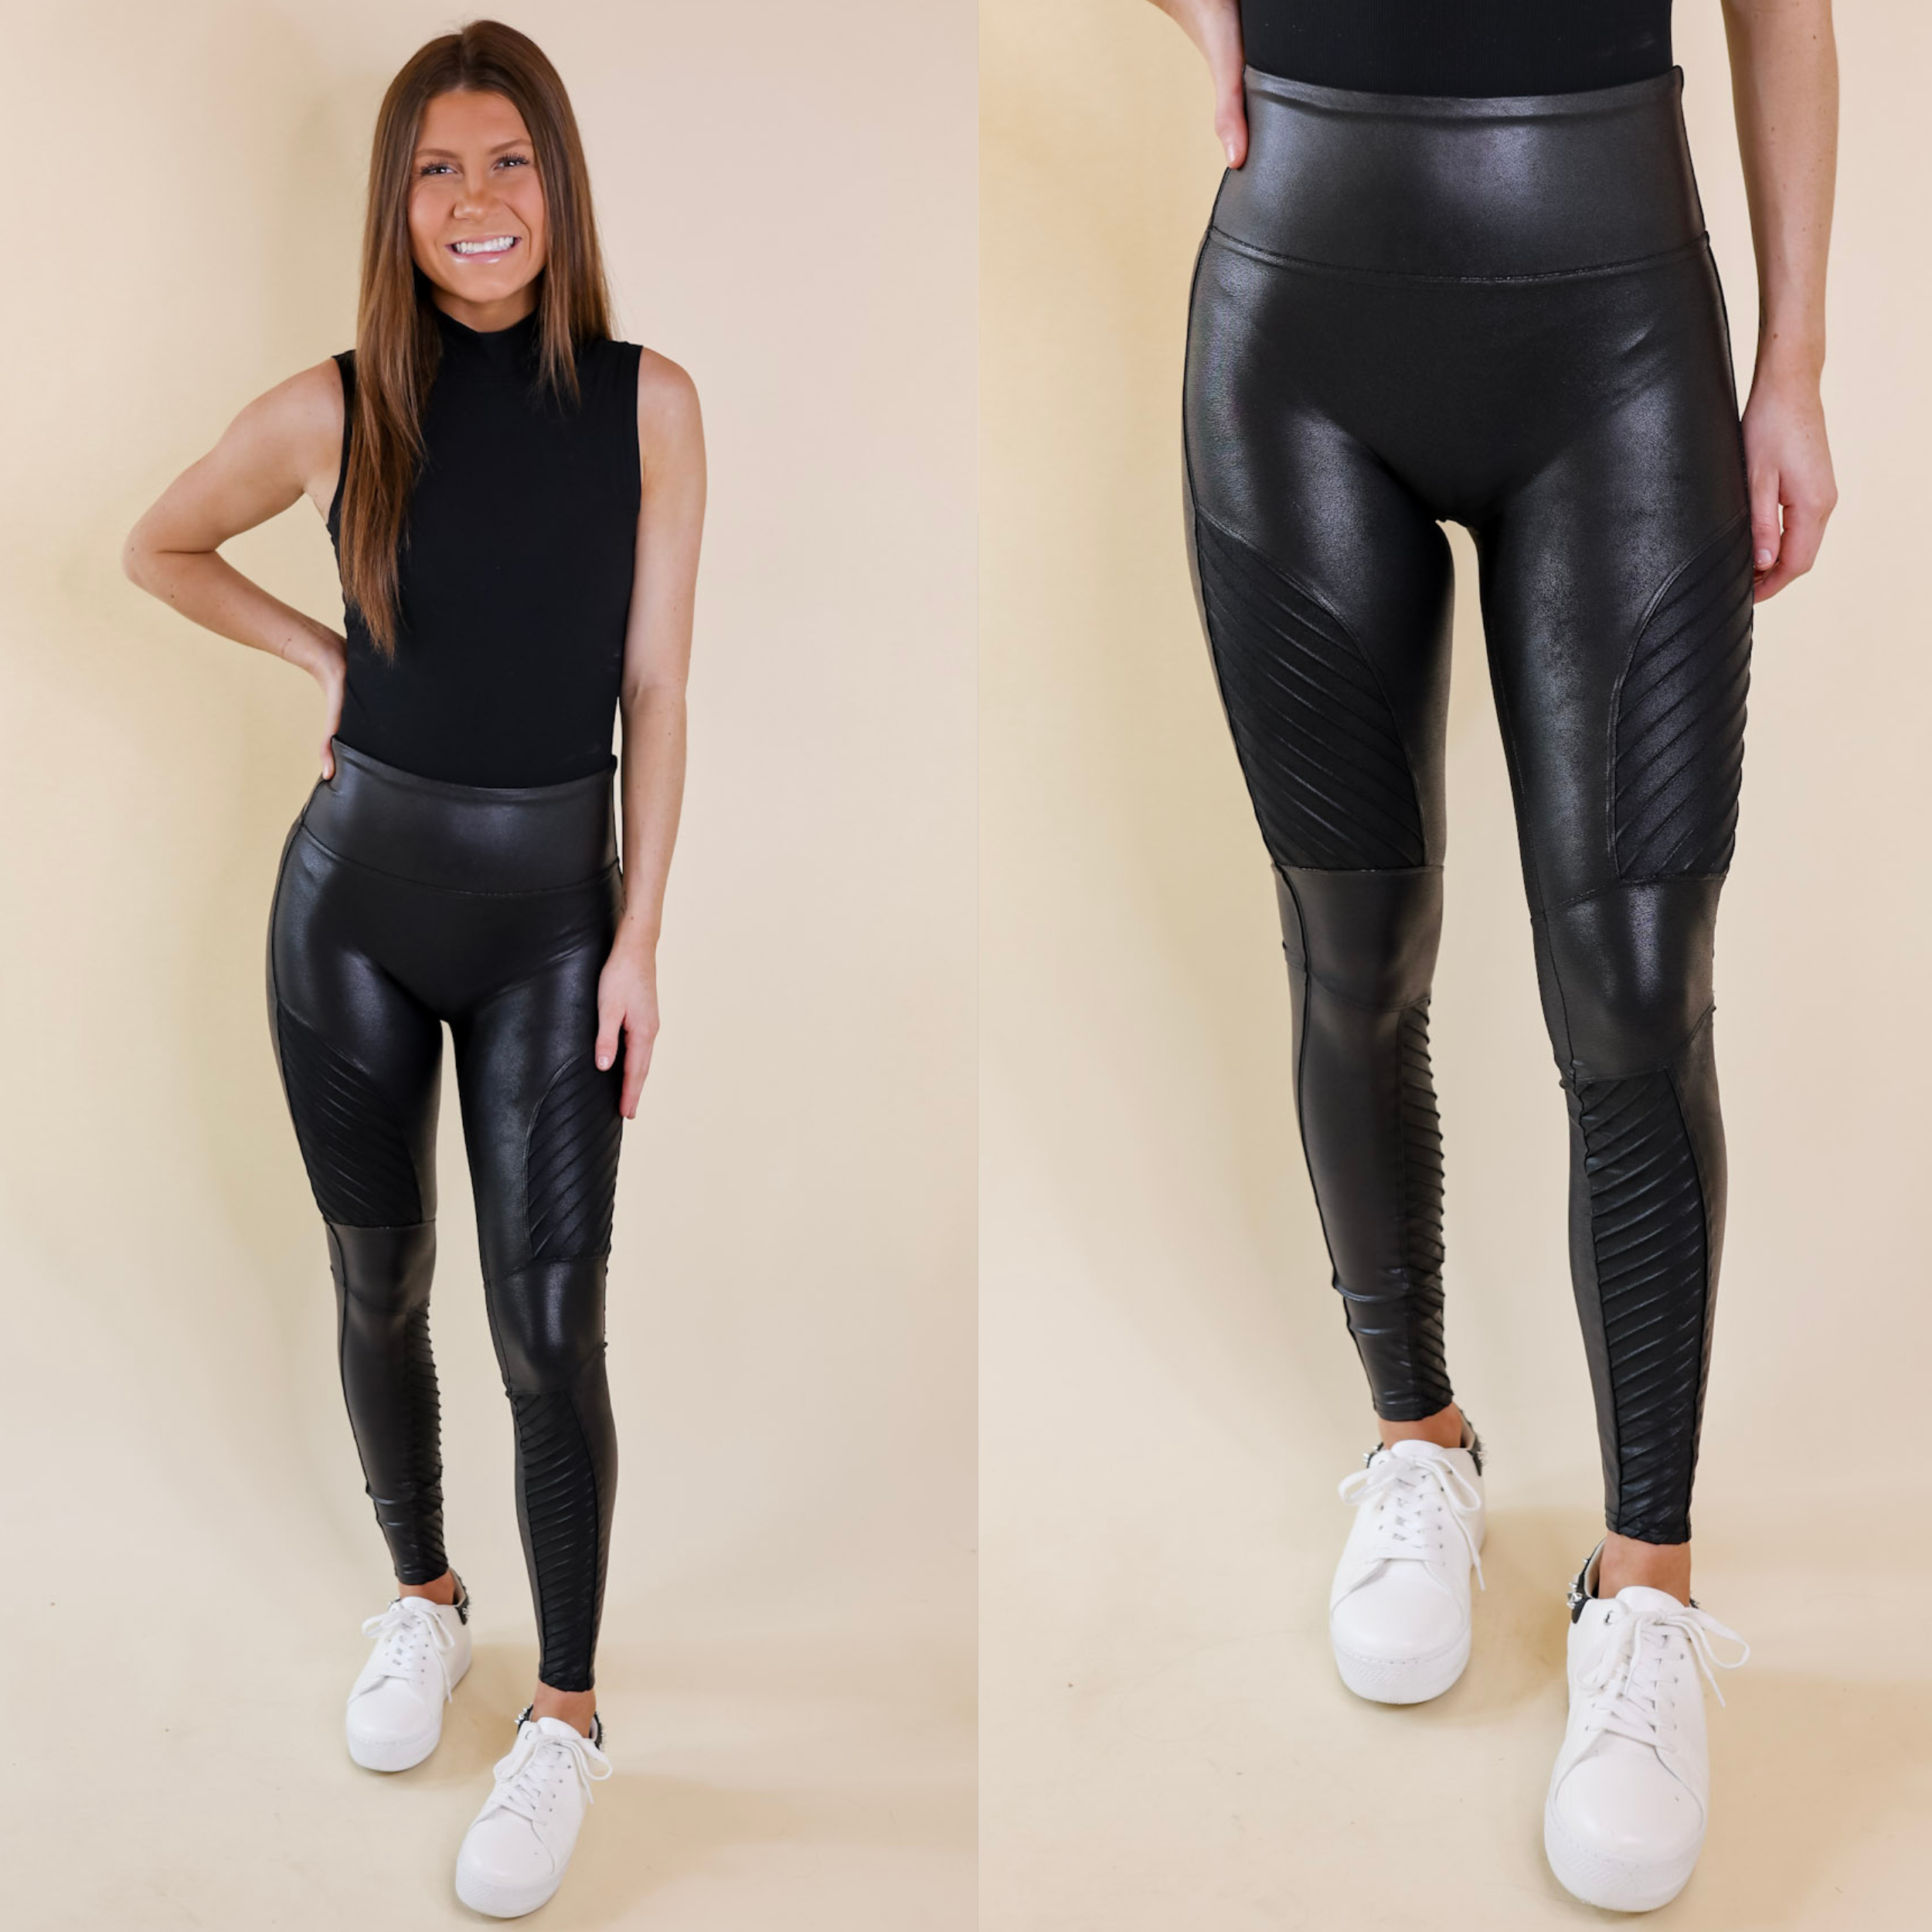 Best Spanx leggings: Tummy controlling activewear, faux leather